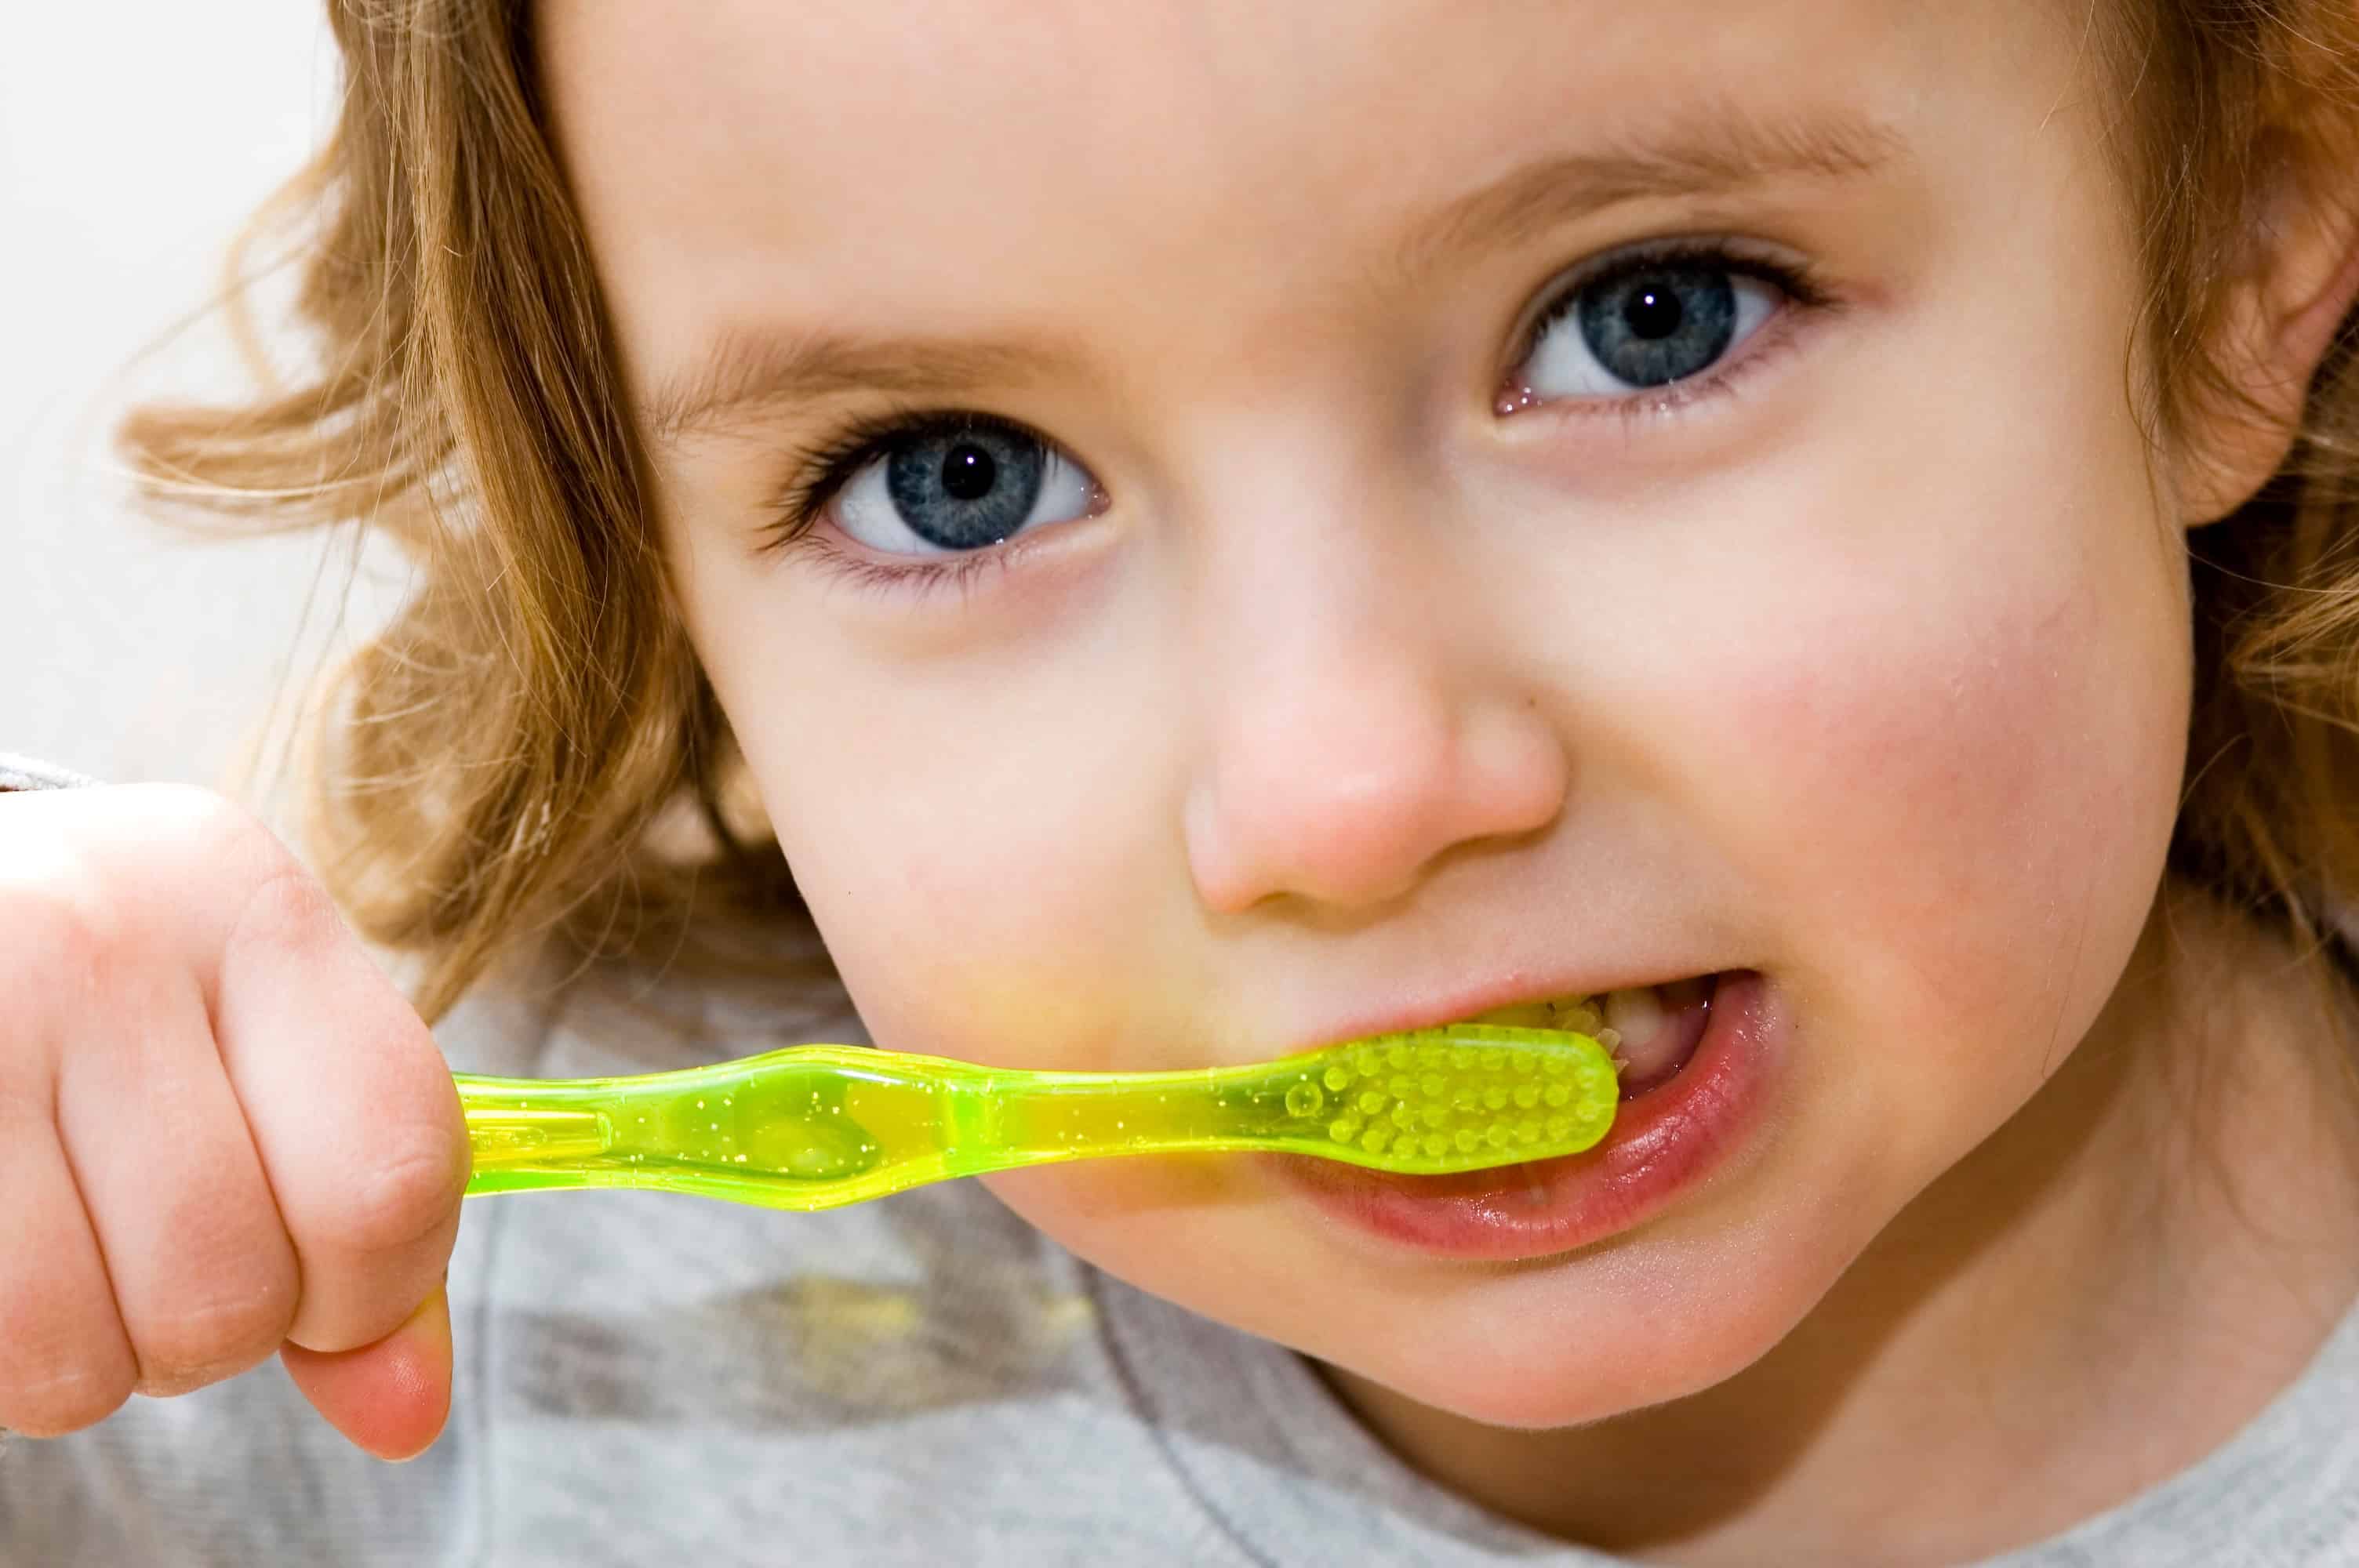 A little girl brushing her teeth against a white background.